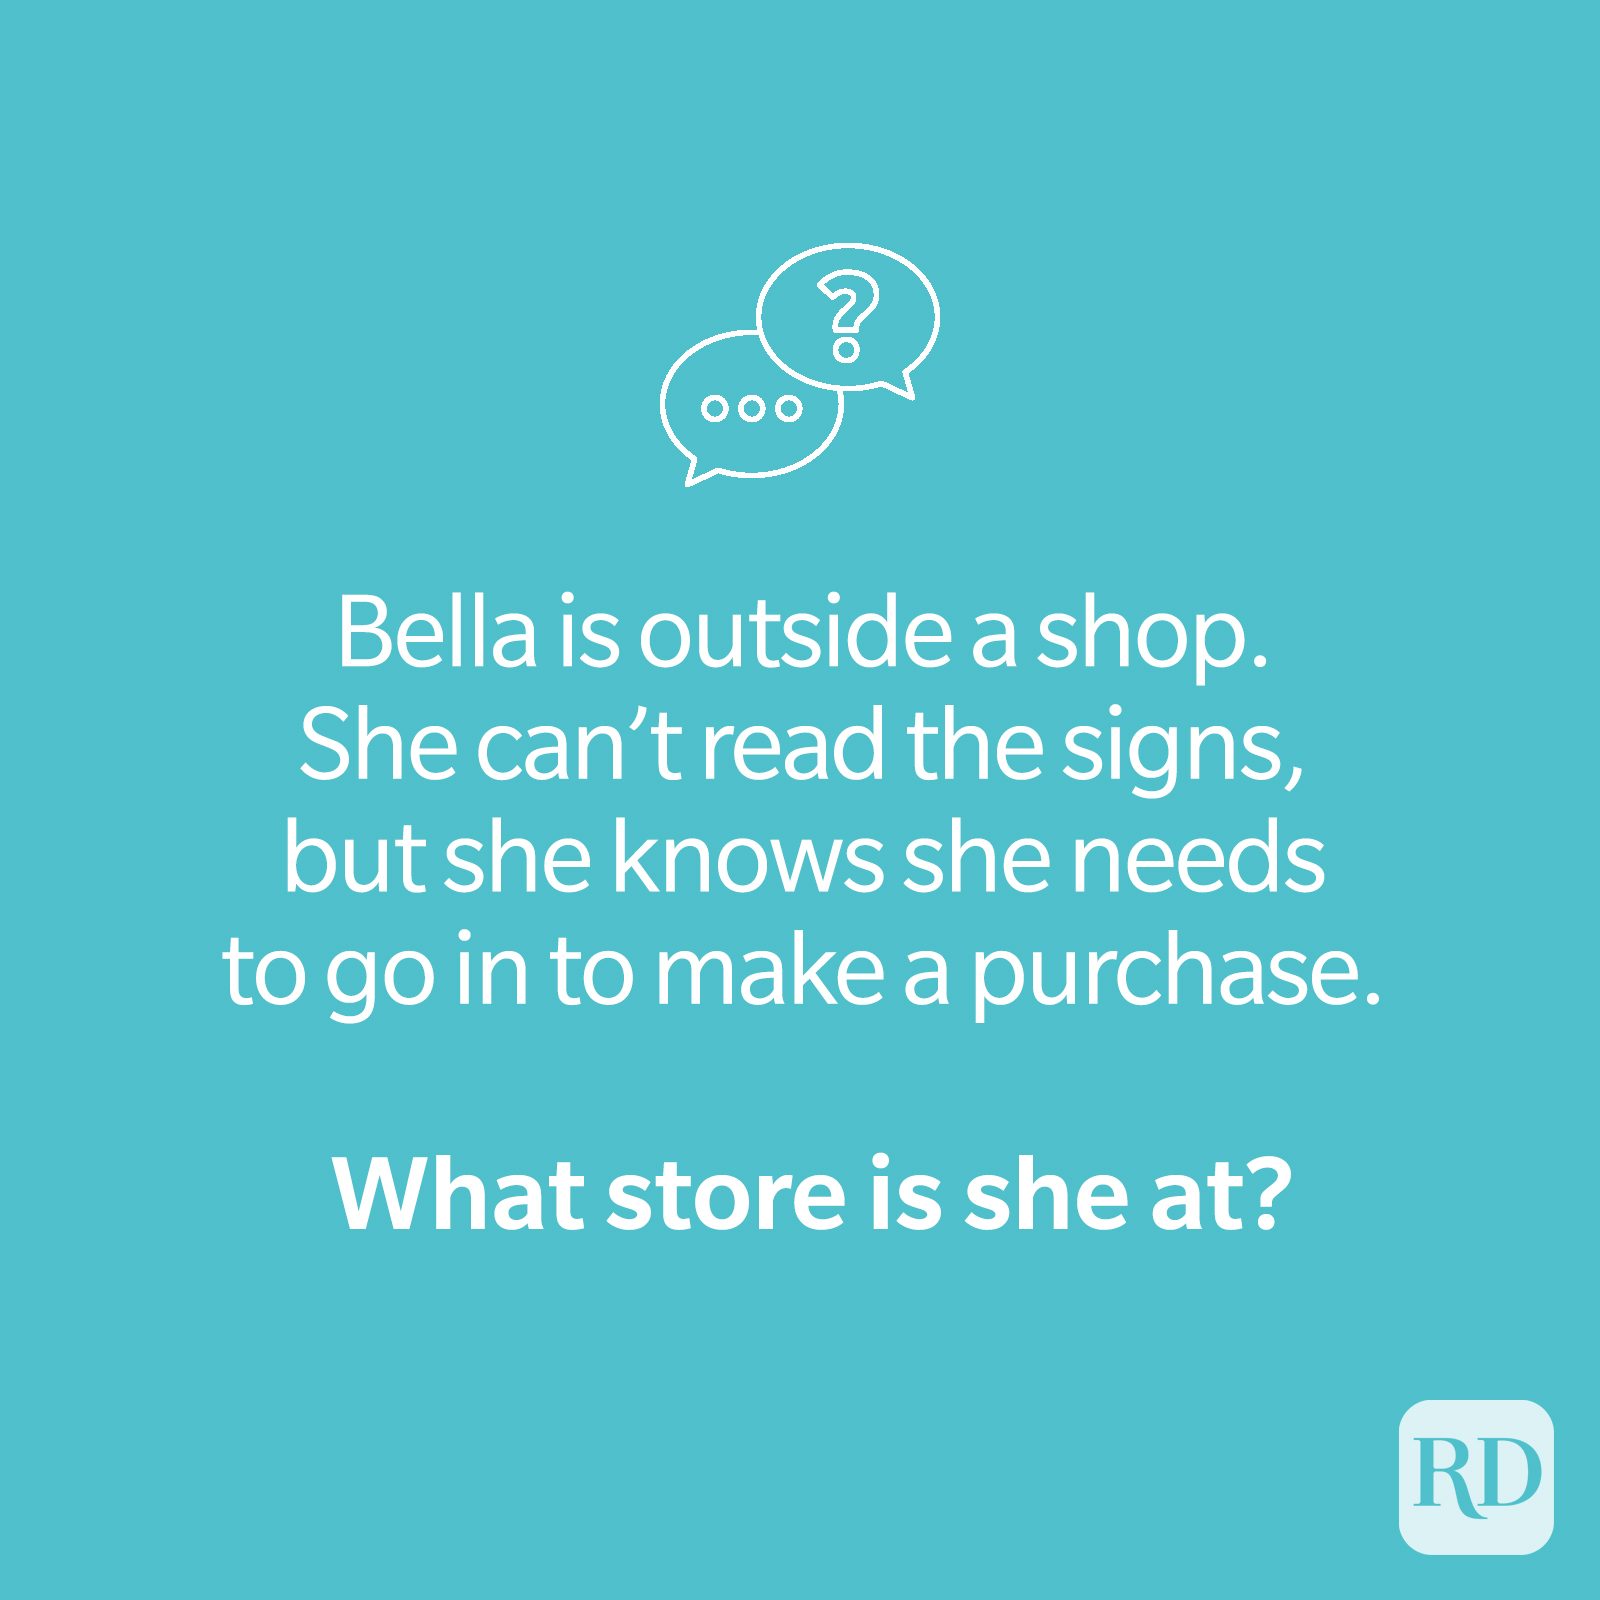 Store riddle on teal